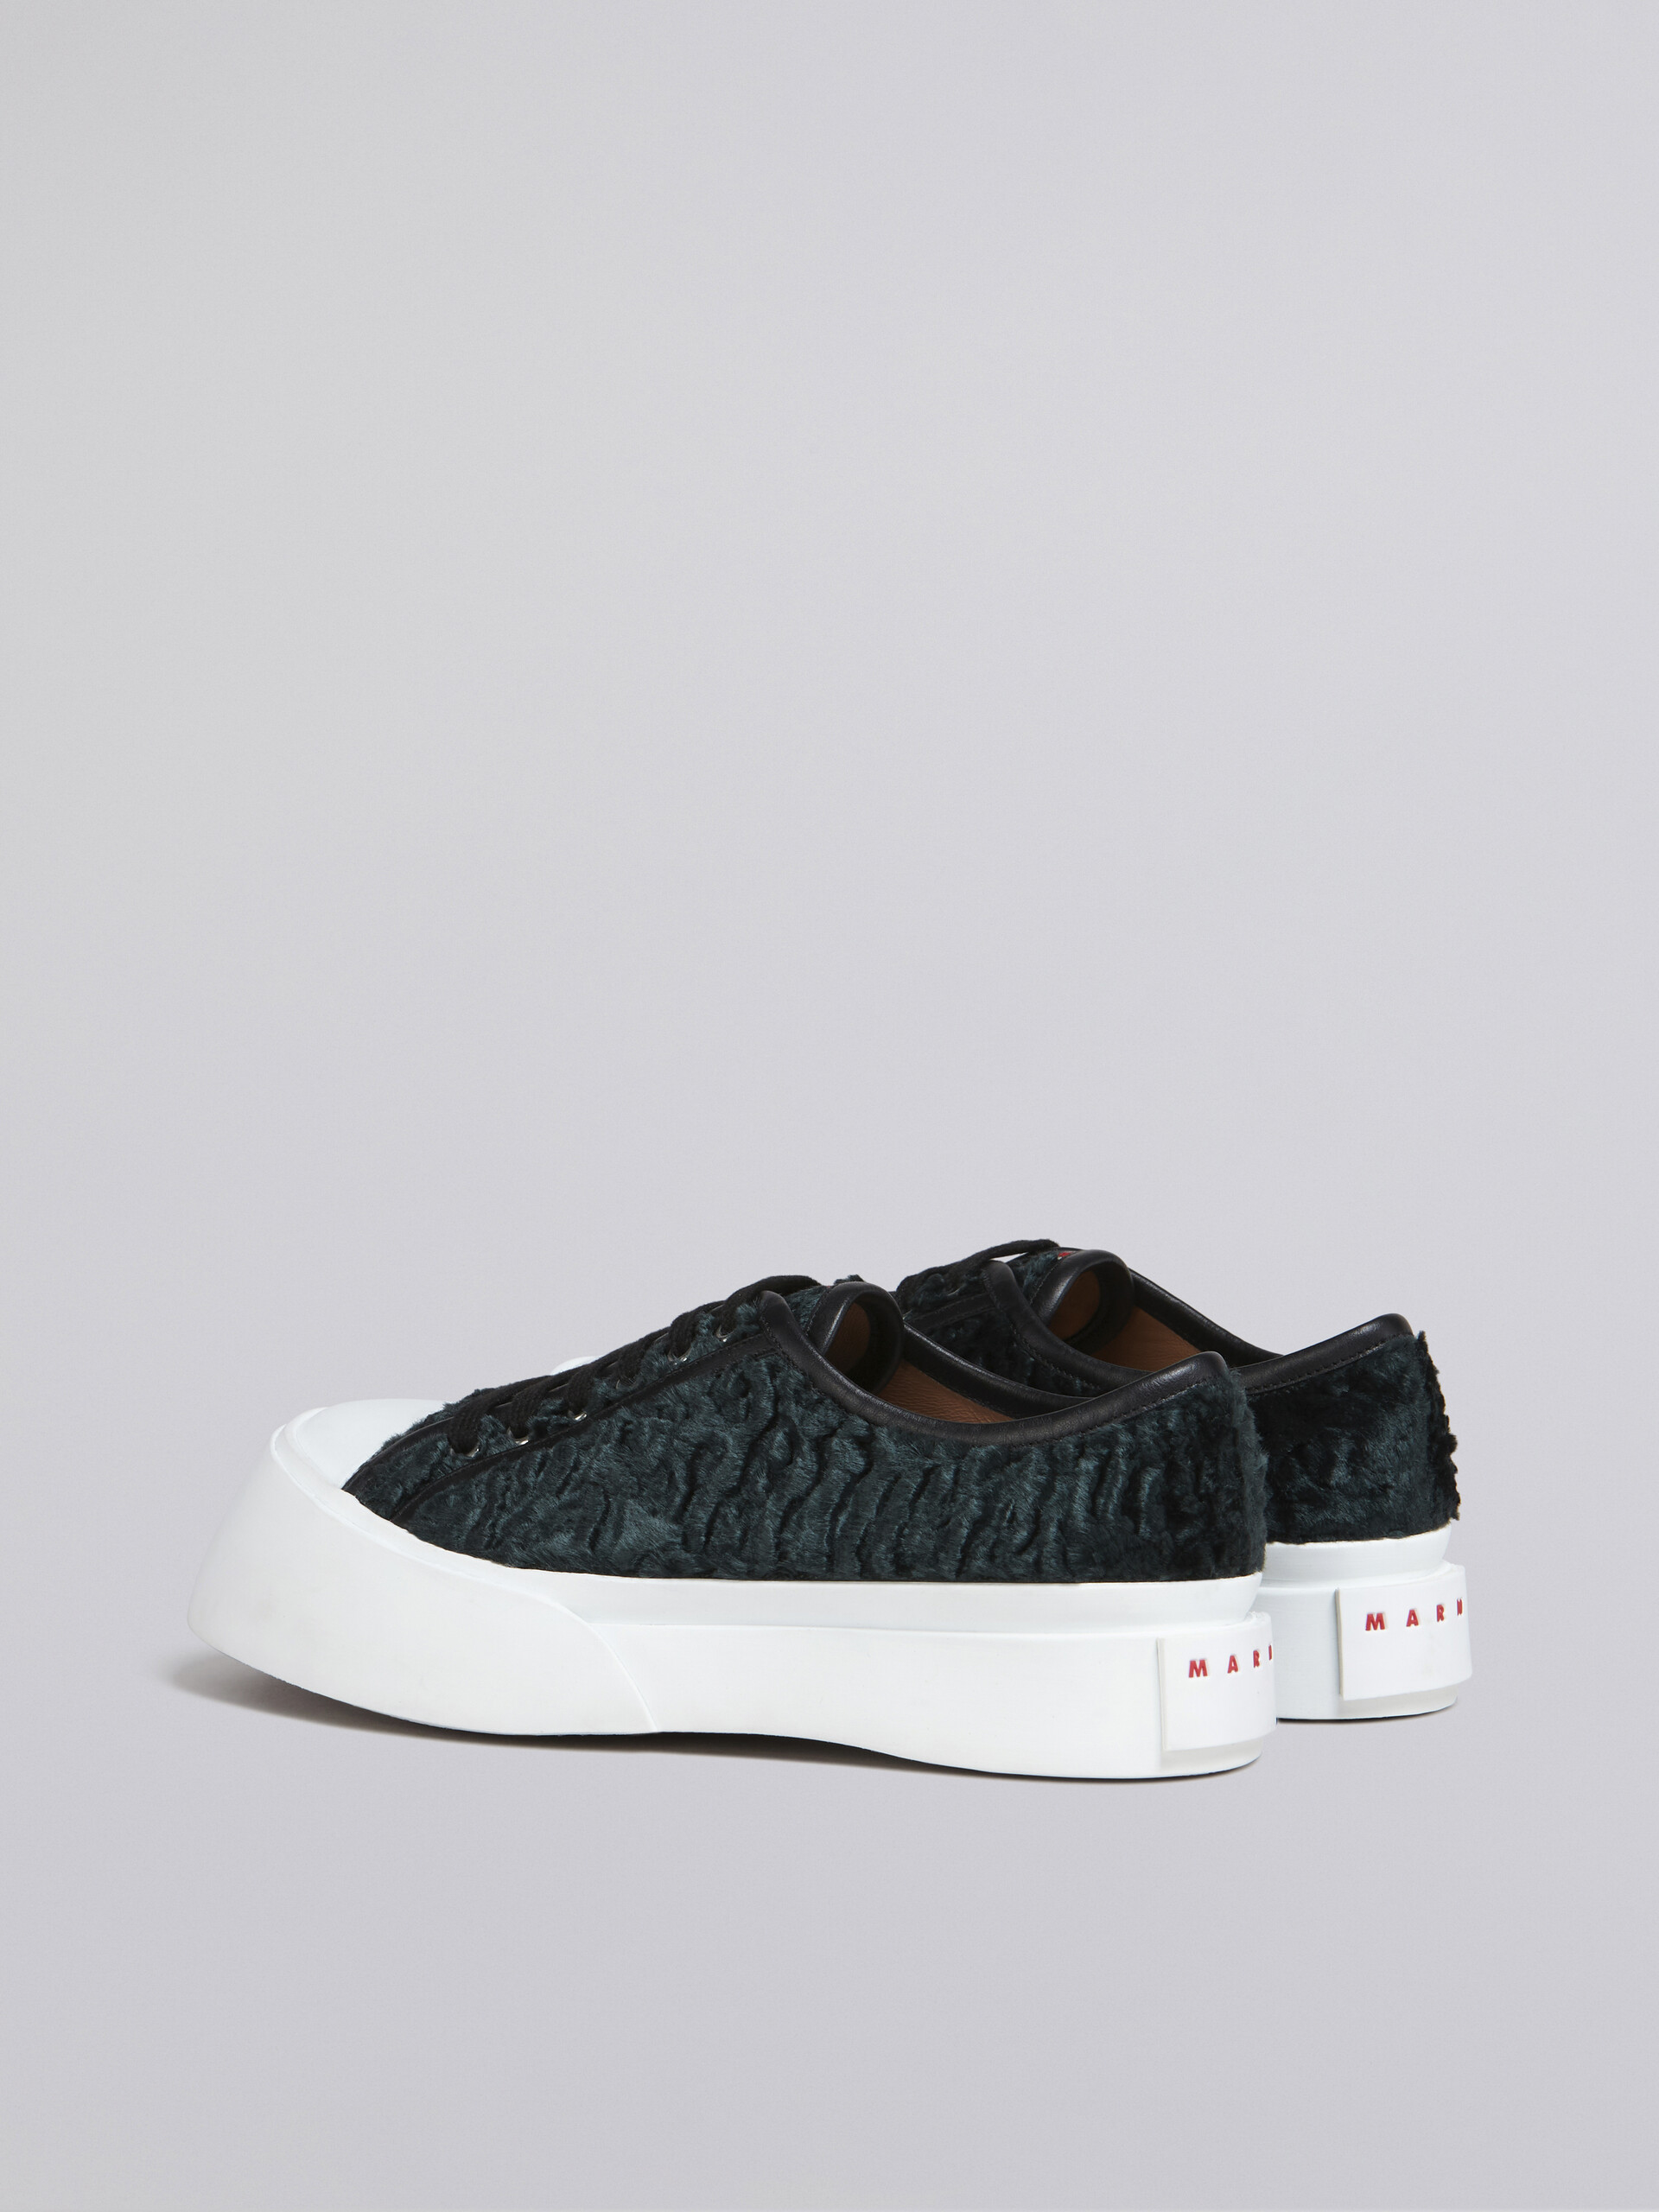 Black curly fabric PABLO lace-up sneaker - Sneakers - Image 3